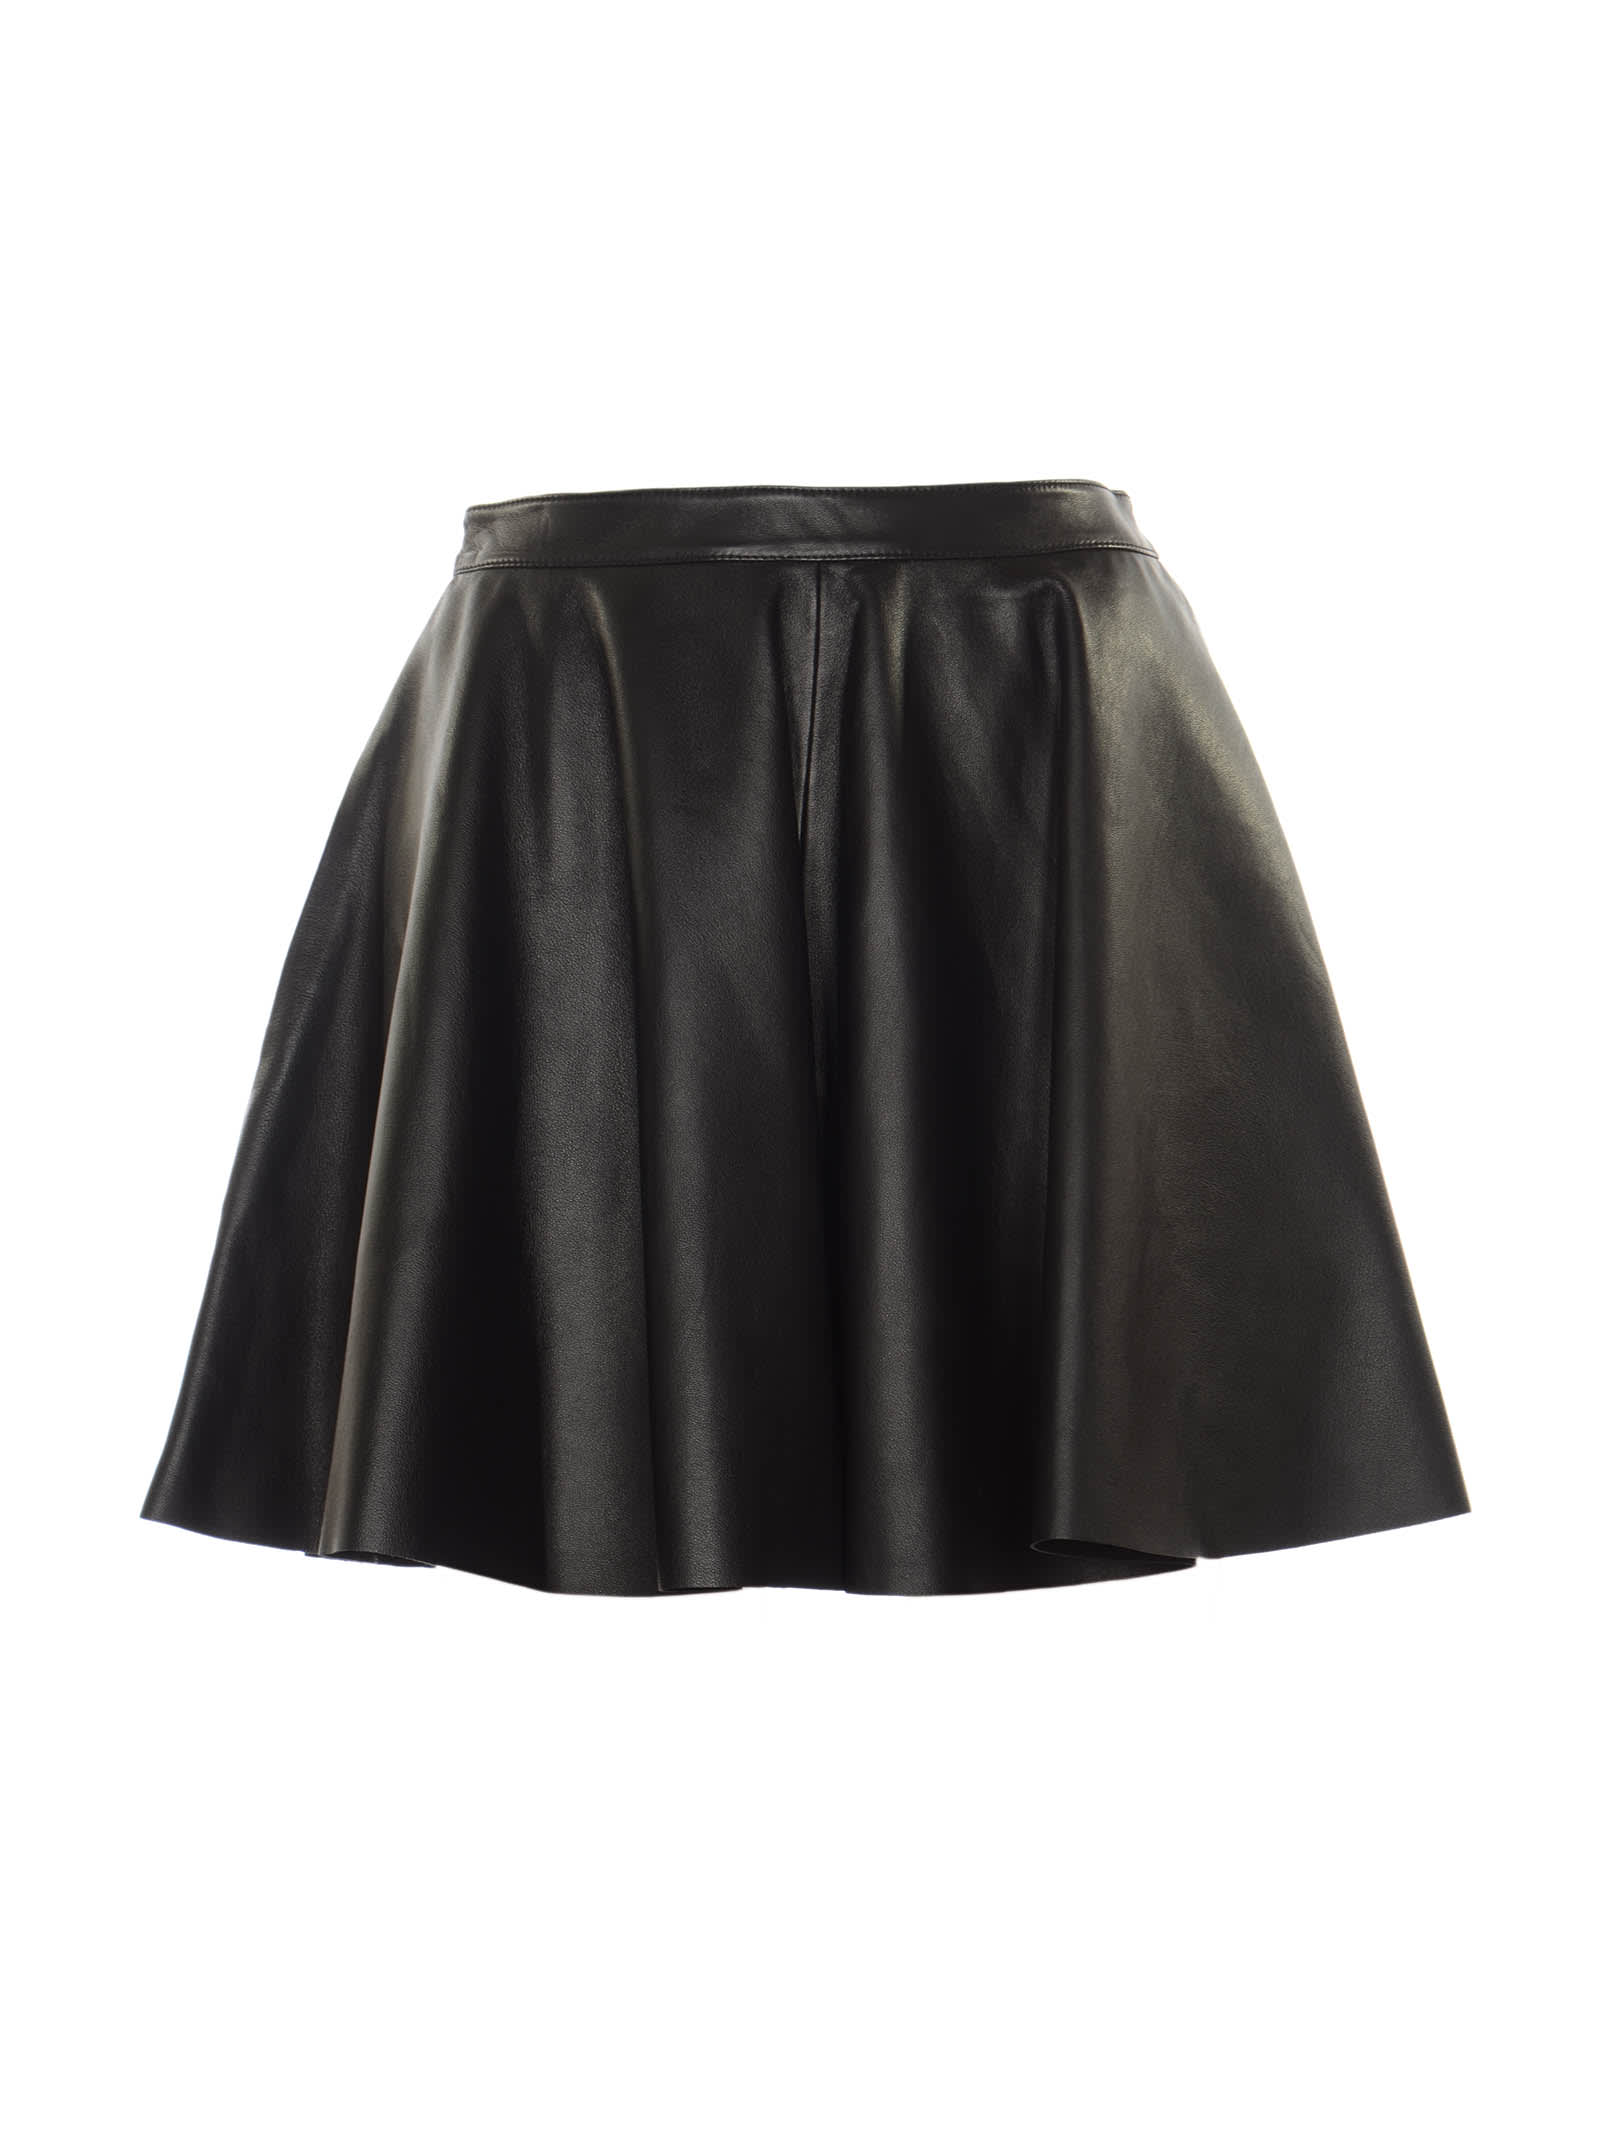 RED Valentino Rear Zip Flared Leather Short Skirt